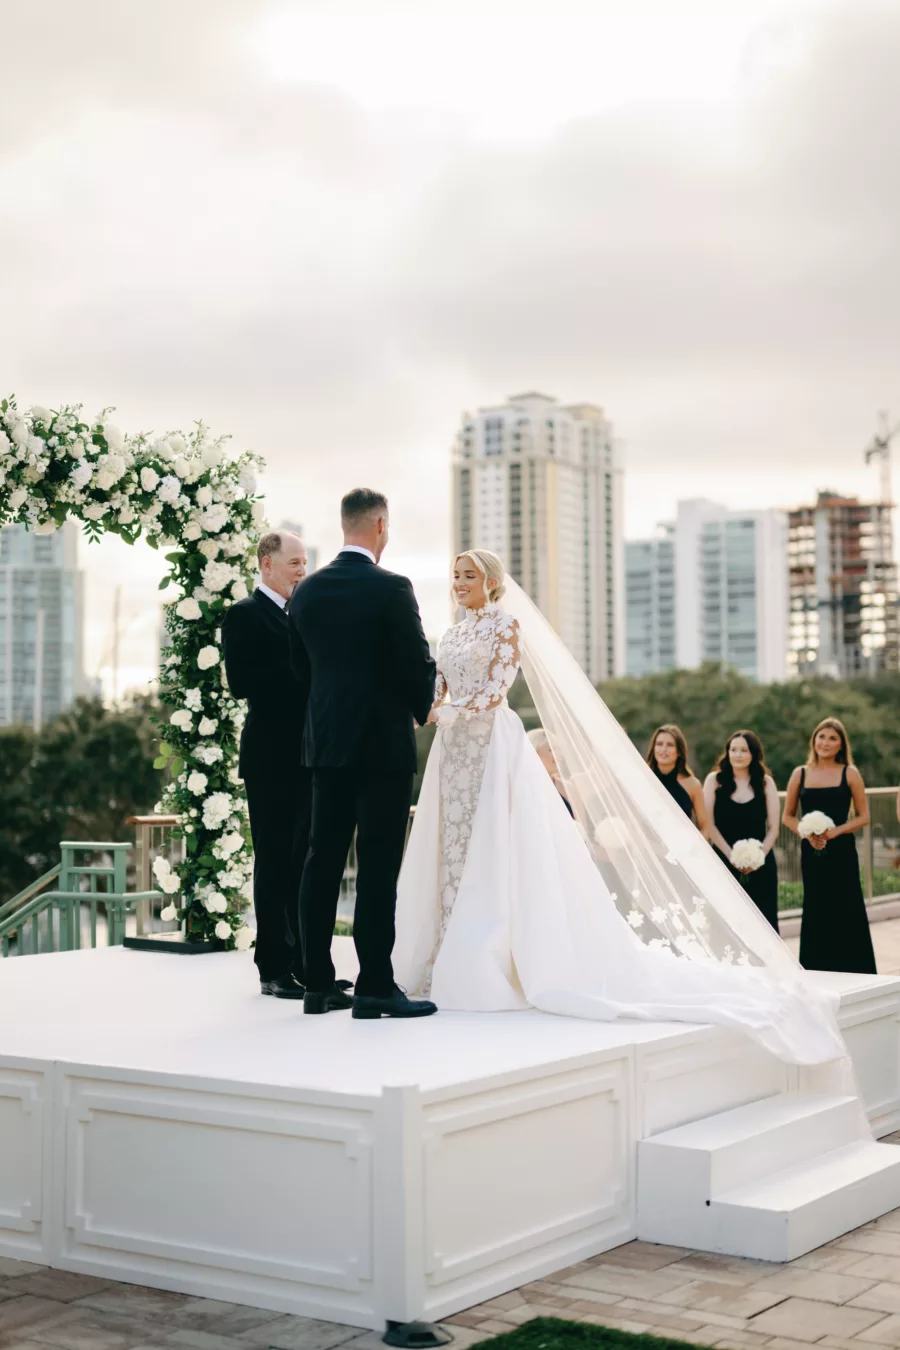 White Roses and Greenery Wedding Ceremony Altar Arch and Stage Decor Ideas | St Pete Historic Hotel Venue The Vinoy